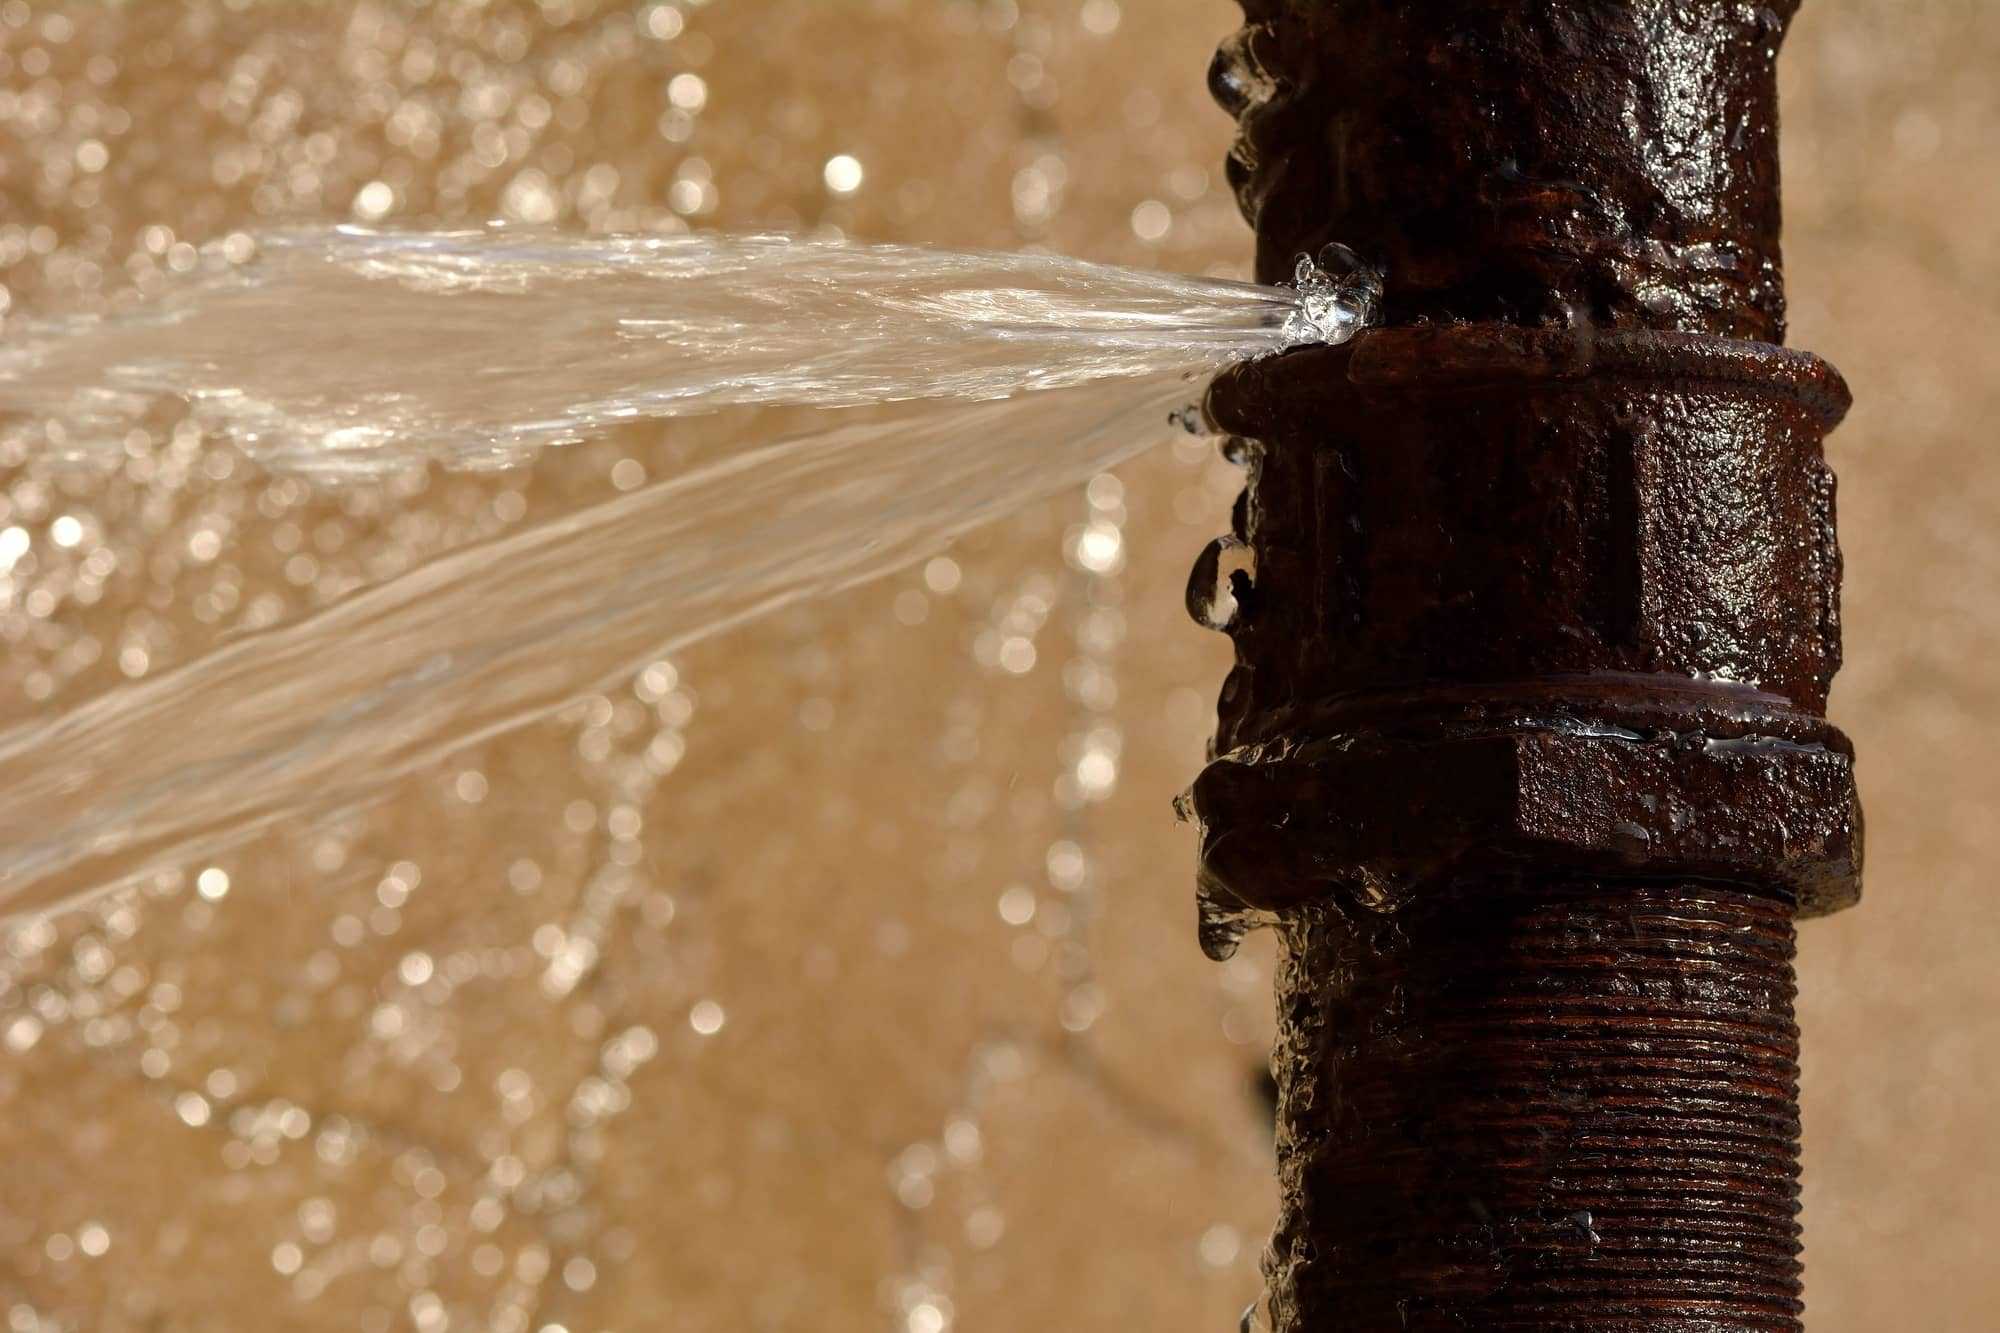 water pipes burst